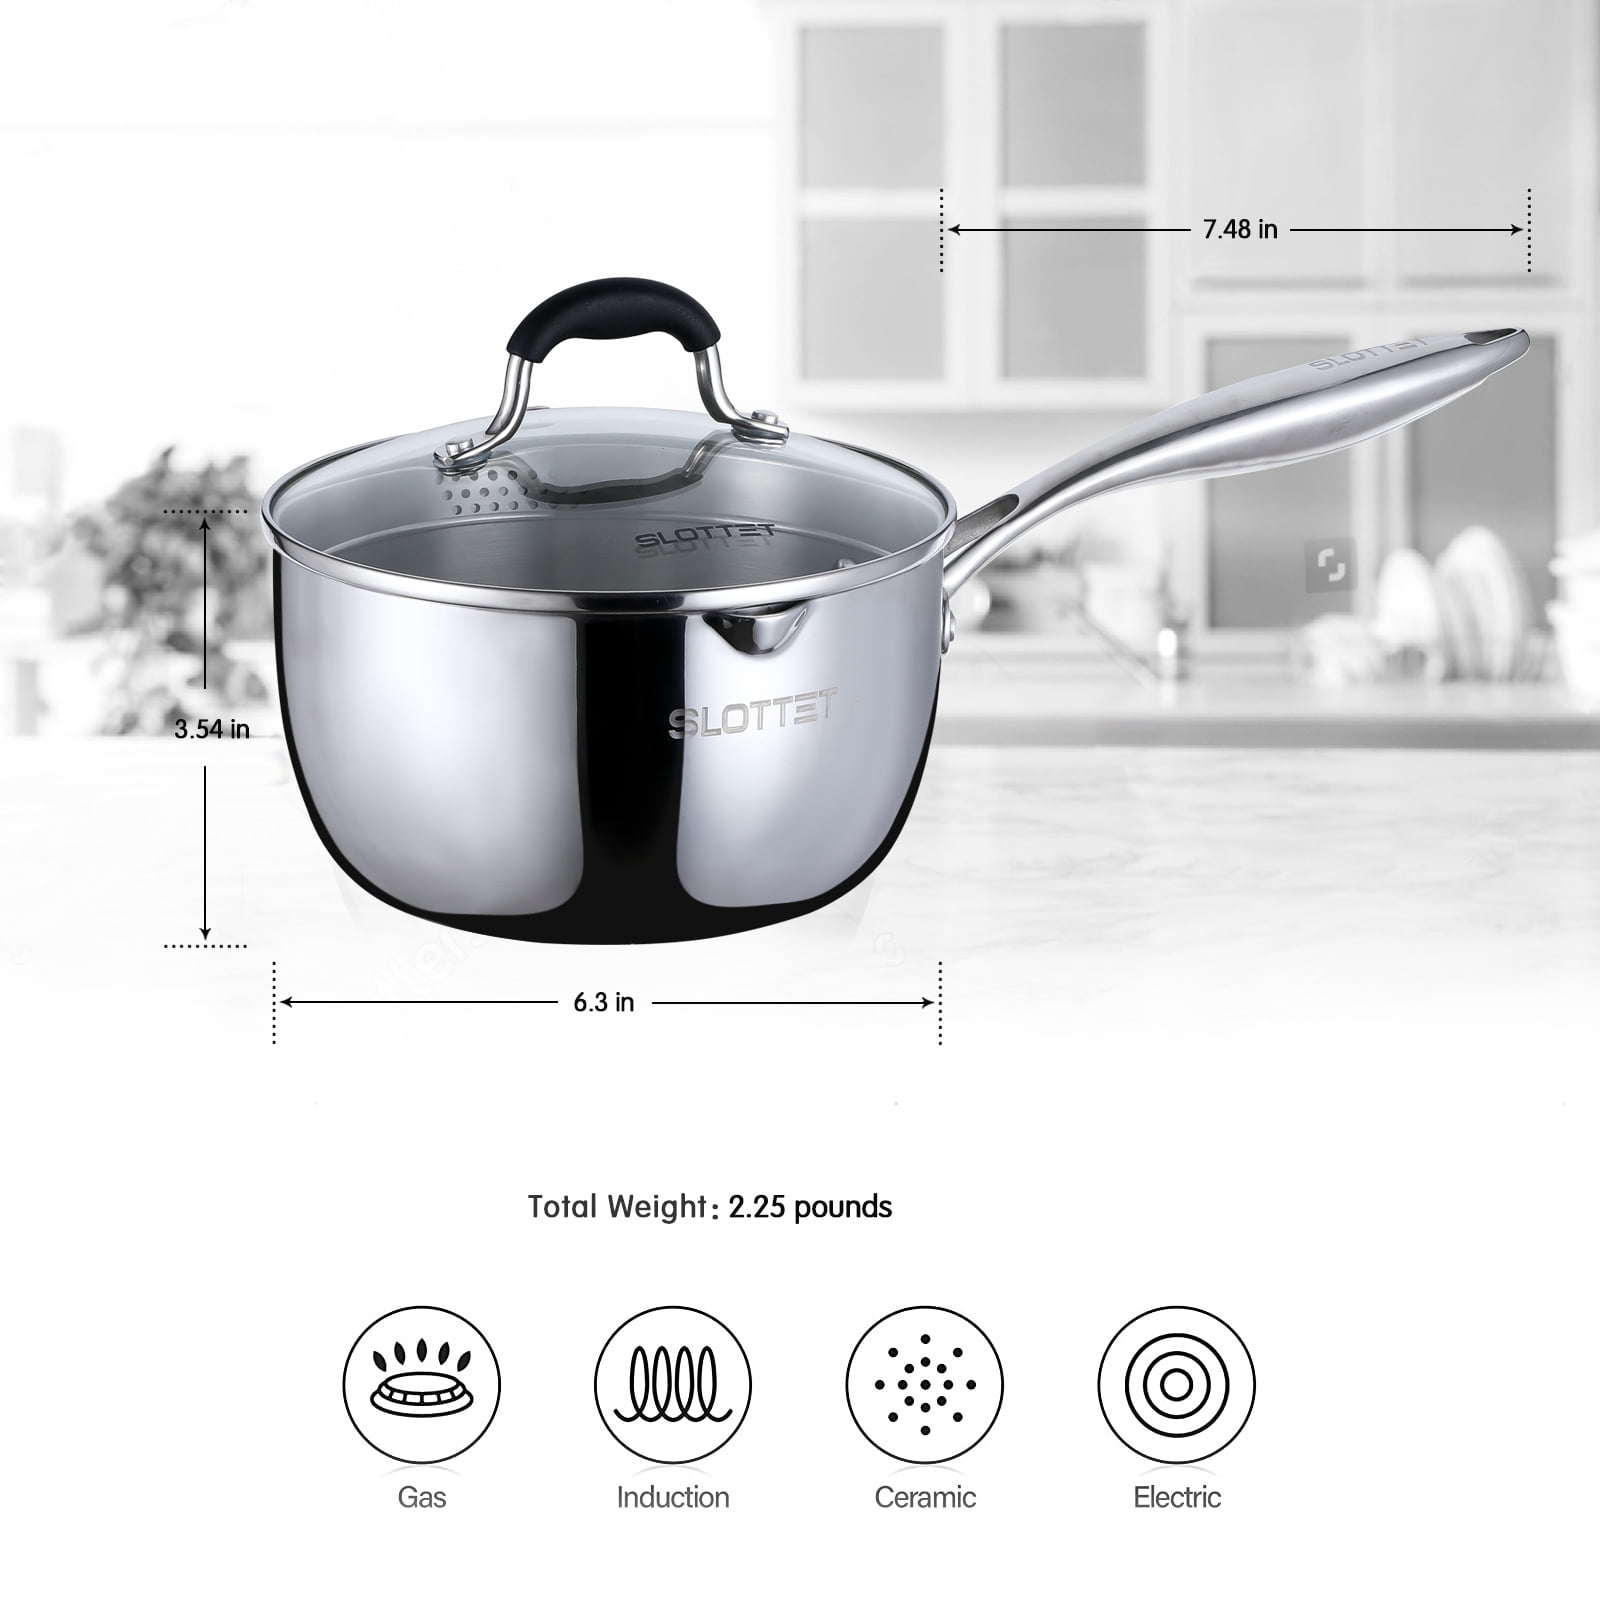 Buttermelt 1.5 Quart Stainless Steel Saucepan with Steamer Basket, Tri-ply  Full Body, Multipurpose Sauce Pot with Two-Size Drainage Holes Lid, Perfect